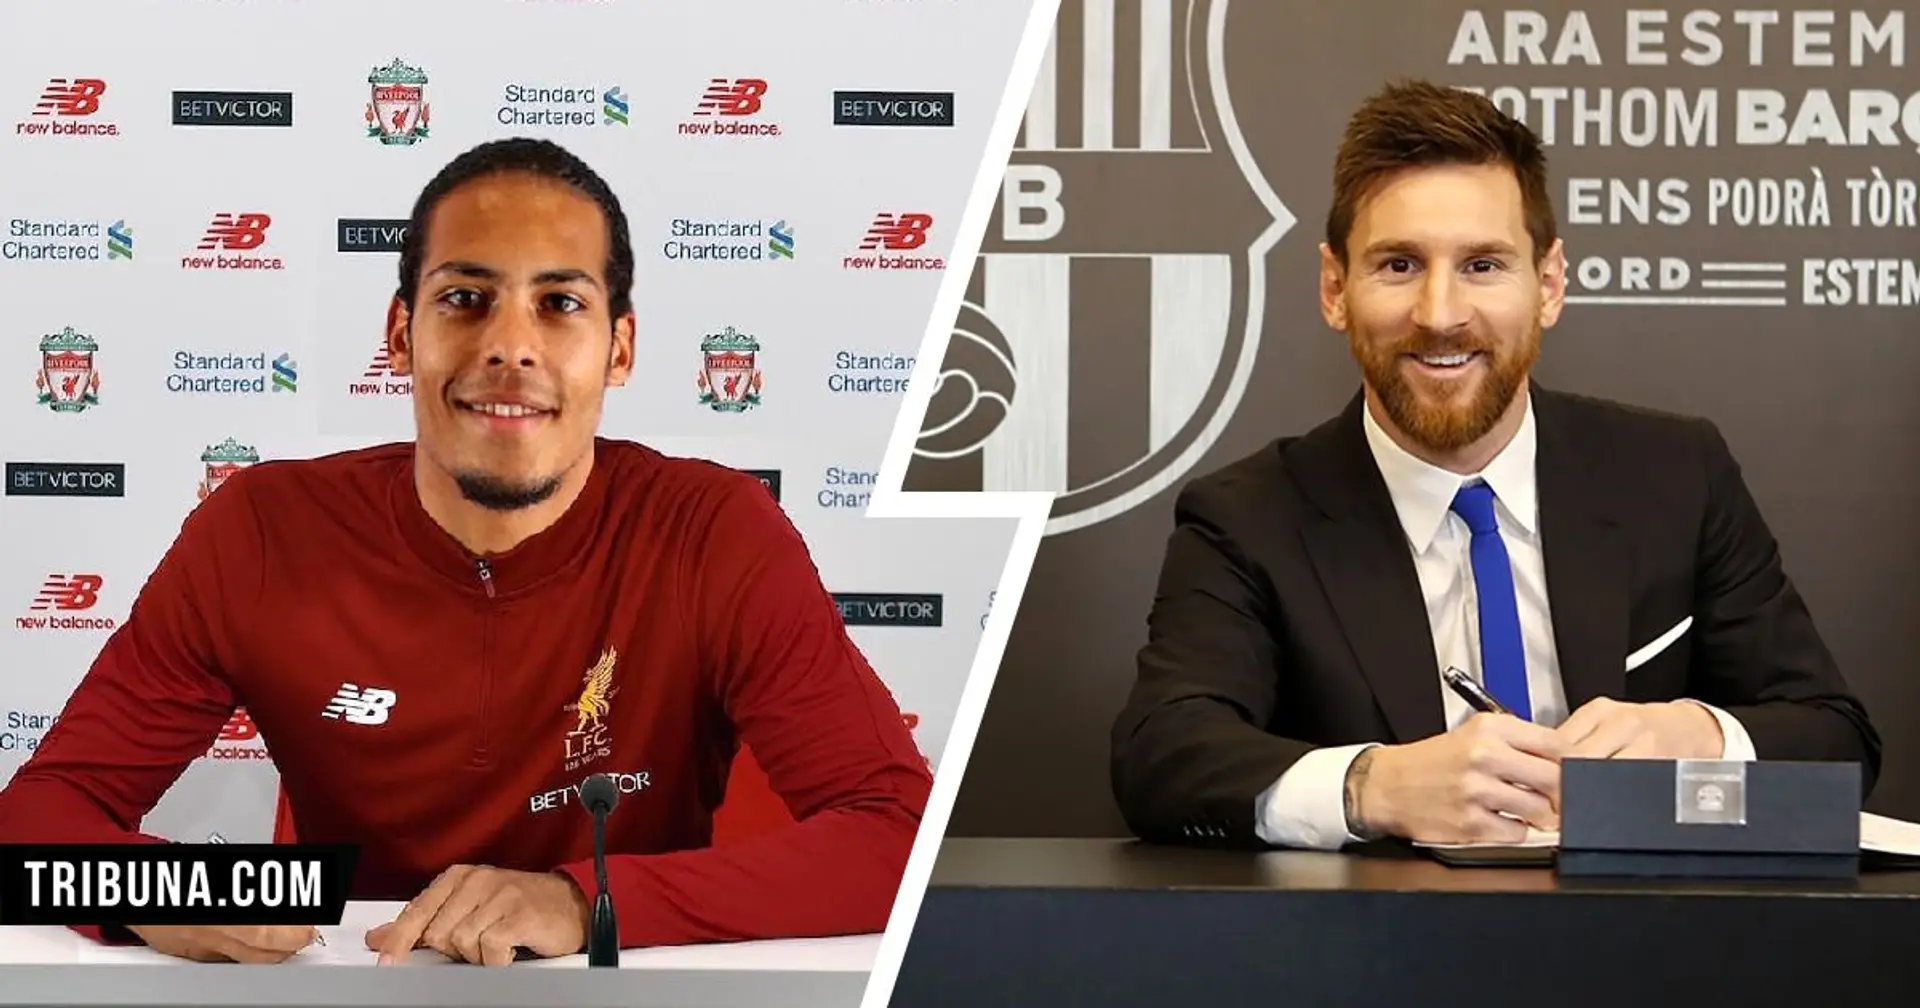 Virgil van Dijk to reportedly receive 'blockbuster' new 7-year deal at Liverpool: Only 7 players in history had longer contracts